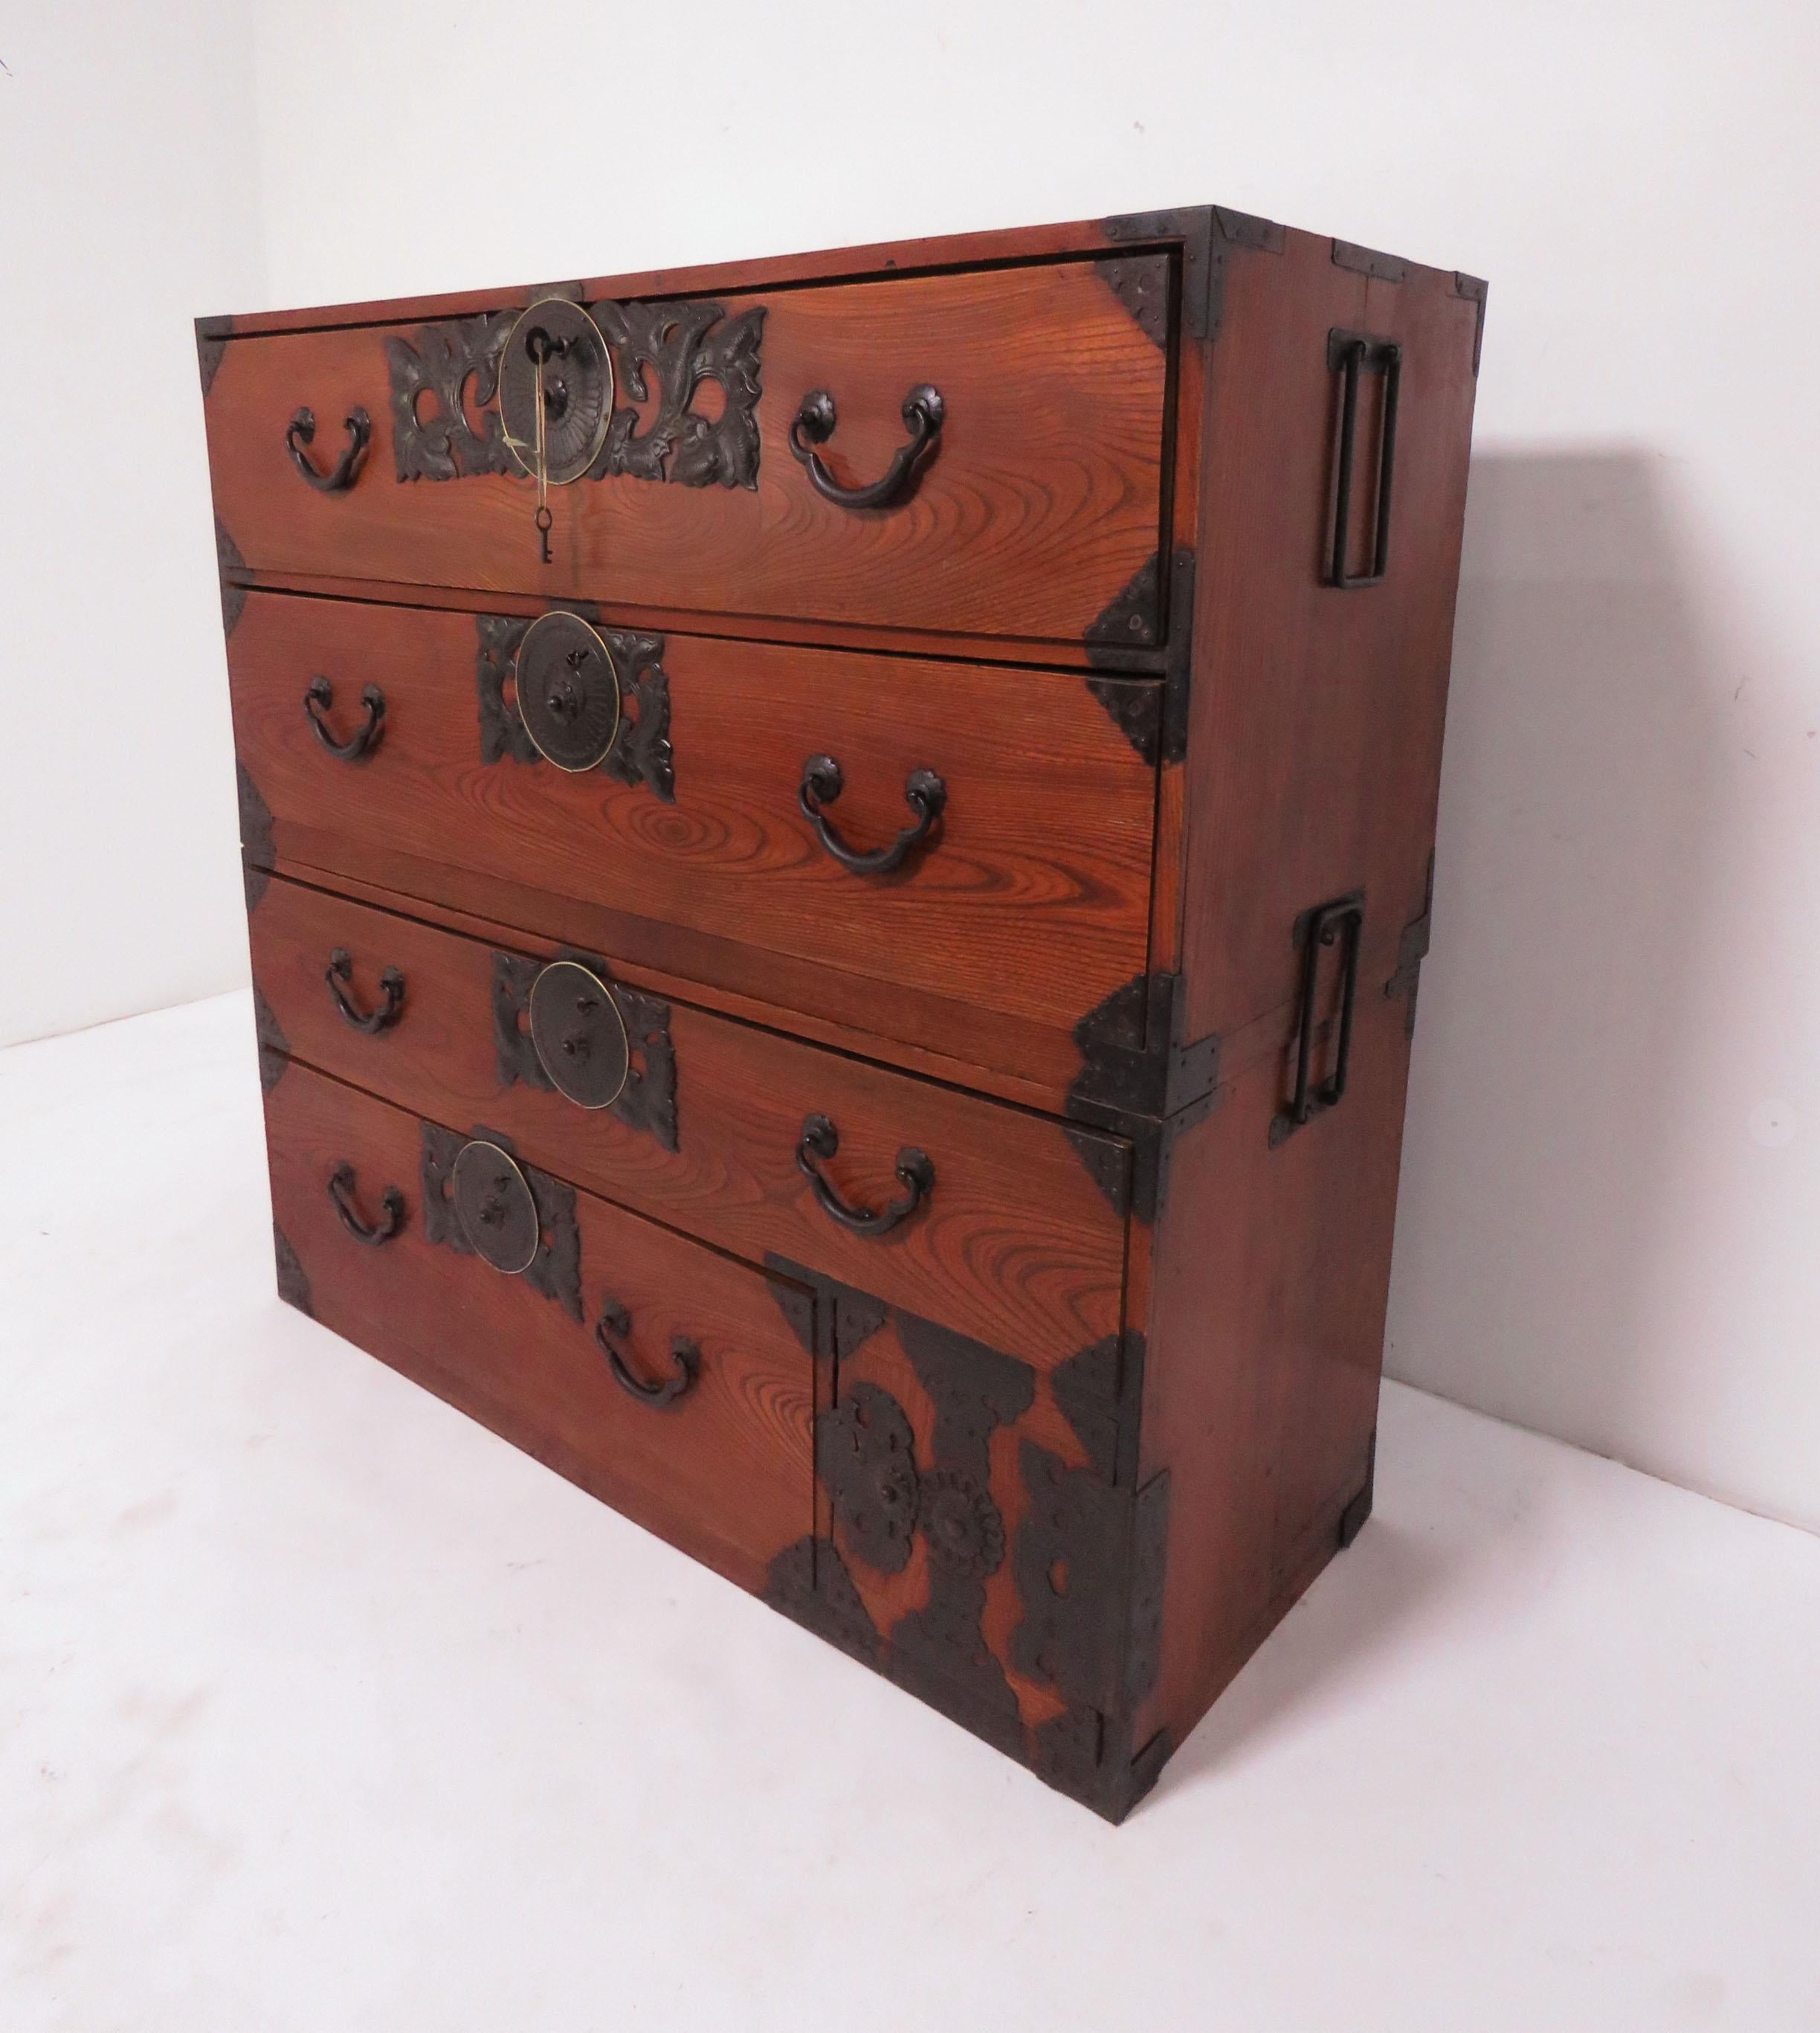 A late 19th century, Meiji period Kasane Tansu chest on chest from the Yonezawa region of Japan. Lacquered kiriwood and elm drawer fronts with hand forged iron hardware. Originally used for silk and kimono storage, makes an excellent dresser as